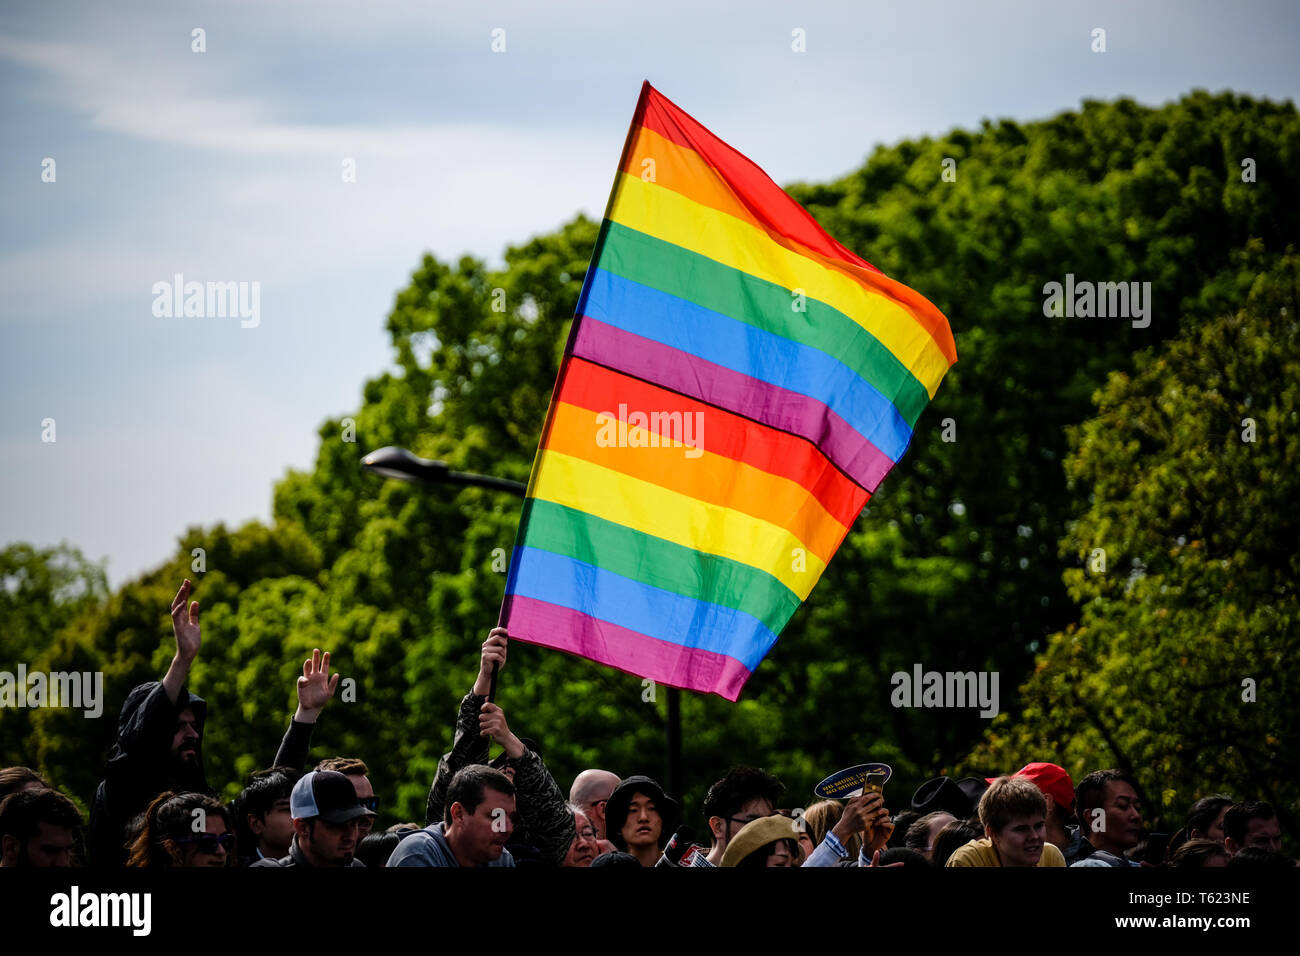 Tokyo, Japan. 28th Apr, 2019. Participants take part in the Tokyo Rainbow Pride Parade in Shibuya District, Tokyo. An estimated 10,000 people participated in the Tokyo Rainbow Pride parade and marched through the streets of Shibuya to spread awareness on a society free of prejudice and discrimination. Credit: Keith Tsuji/ZUMA Wire/Alamy Live News Stock Photo